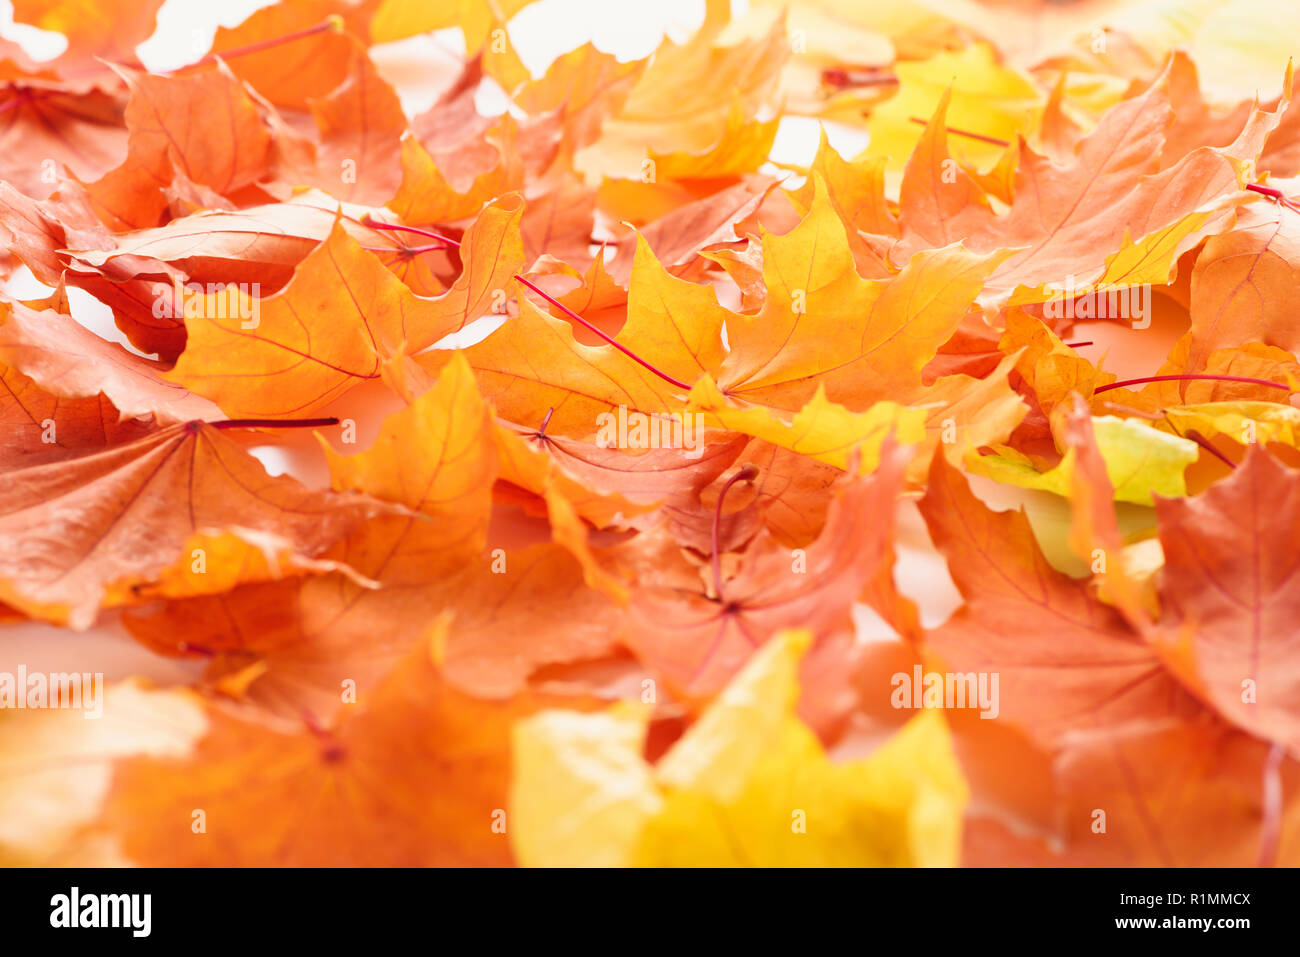 selective focus of orange and yellow maple leaves, autumn background Stock Photo